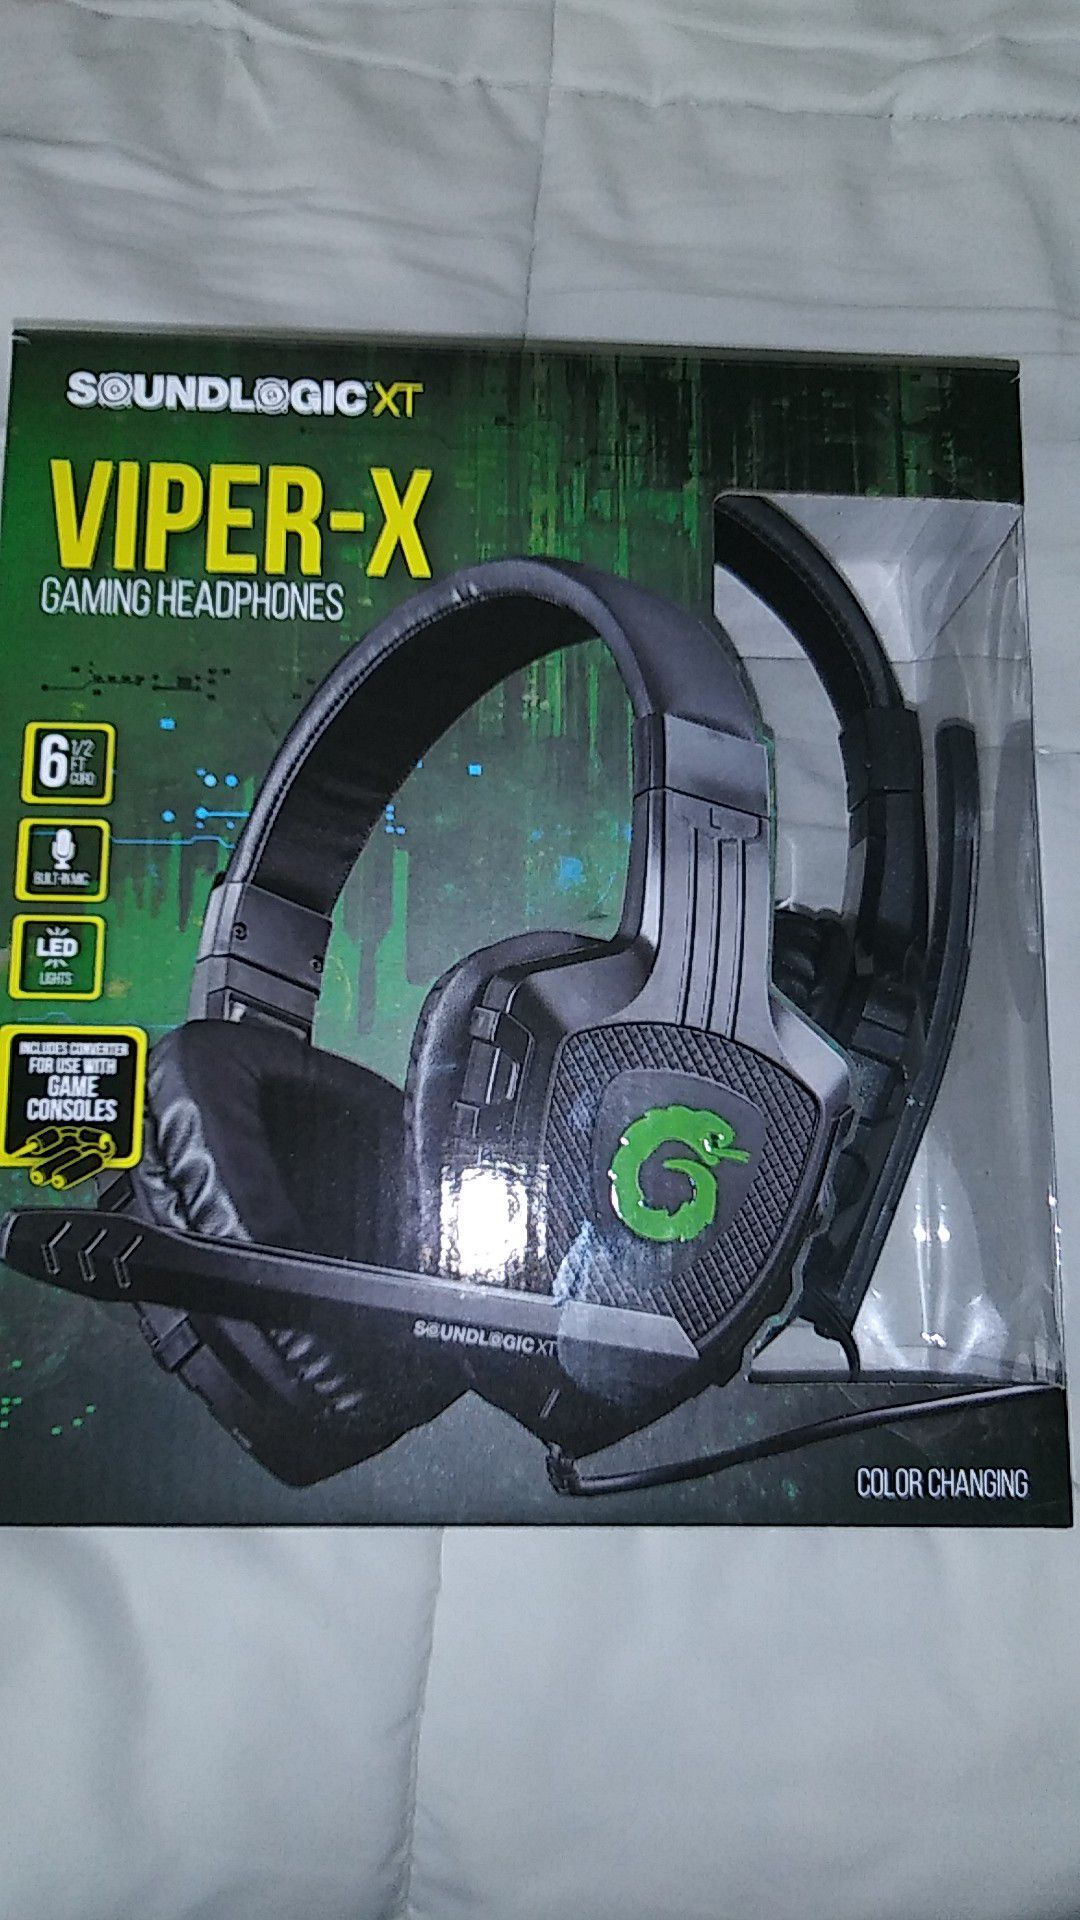 Viper X gaming headphones brand new in the box 6 1/2 foot cord built-in mic LED lights includes converter for gaming consoles